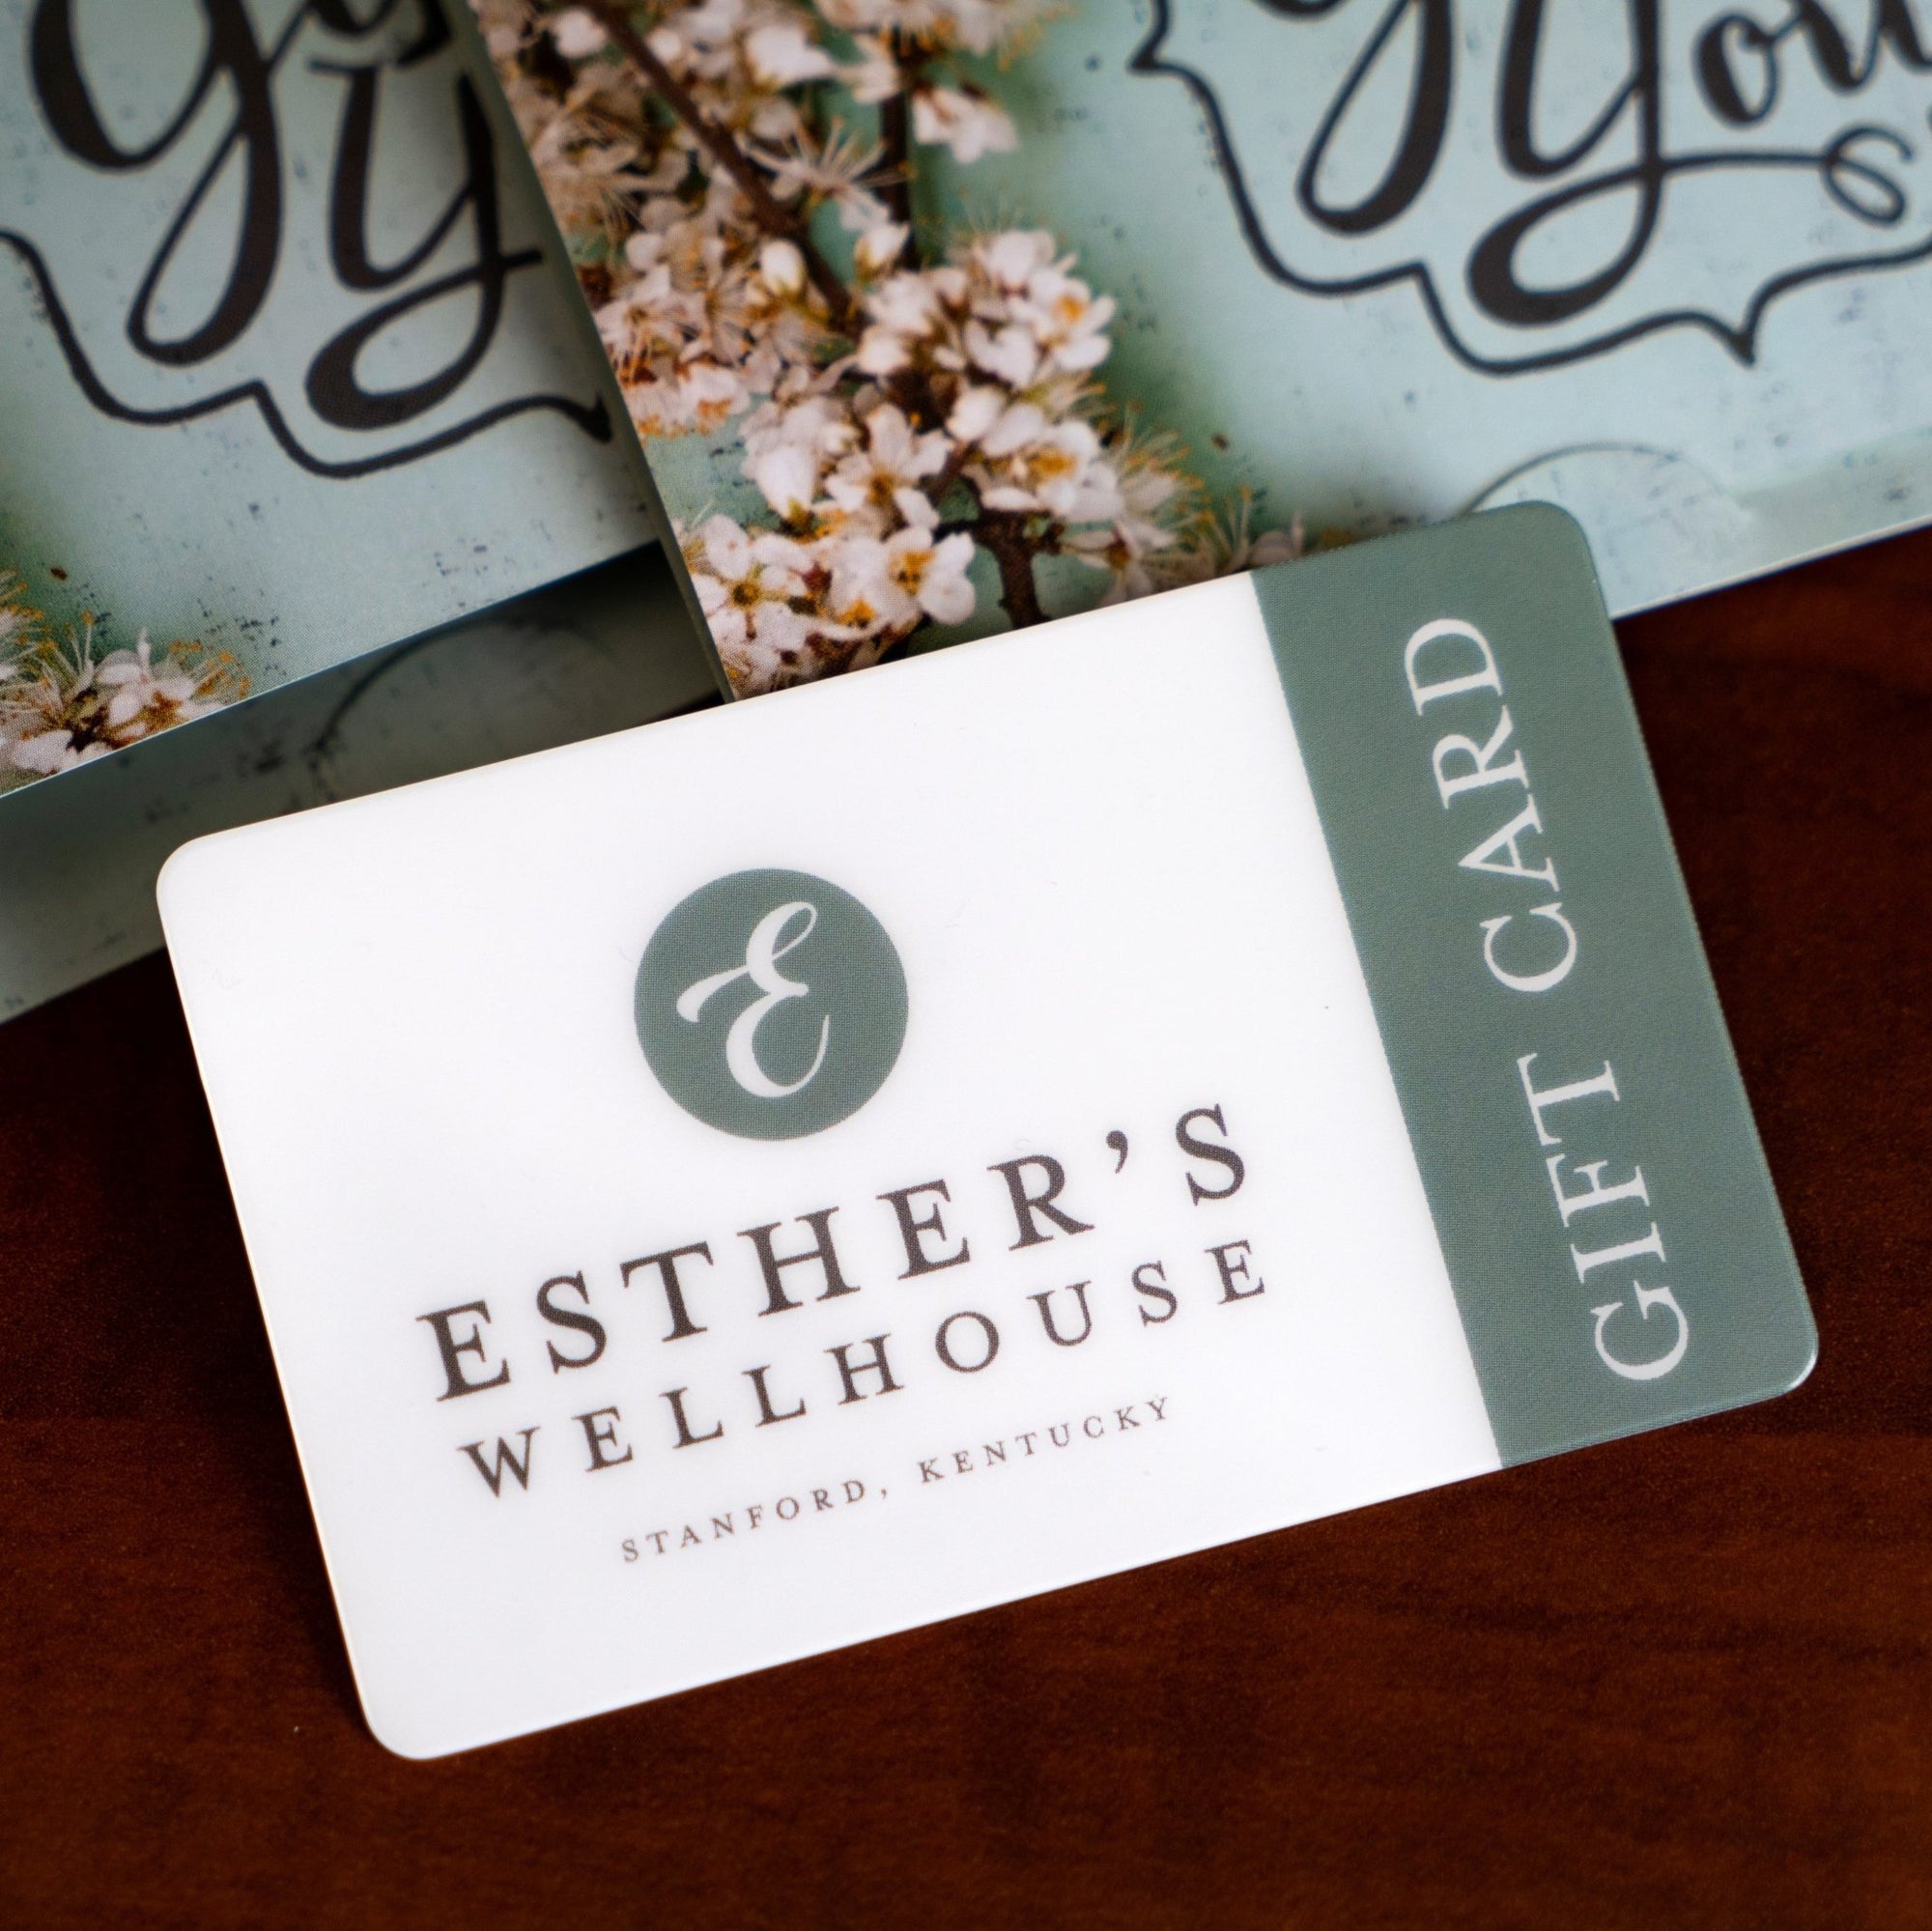 Esther's Wellhouse Gift Card - Kentucky Soaps & Such